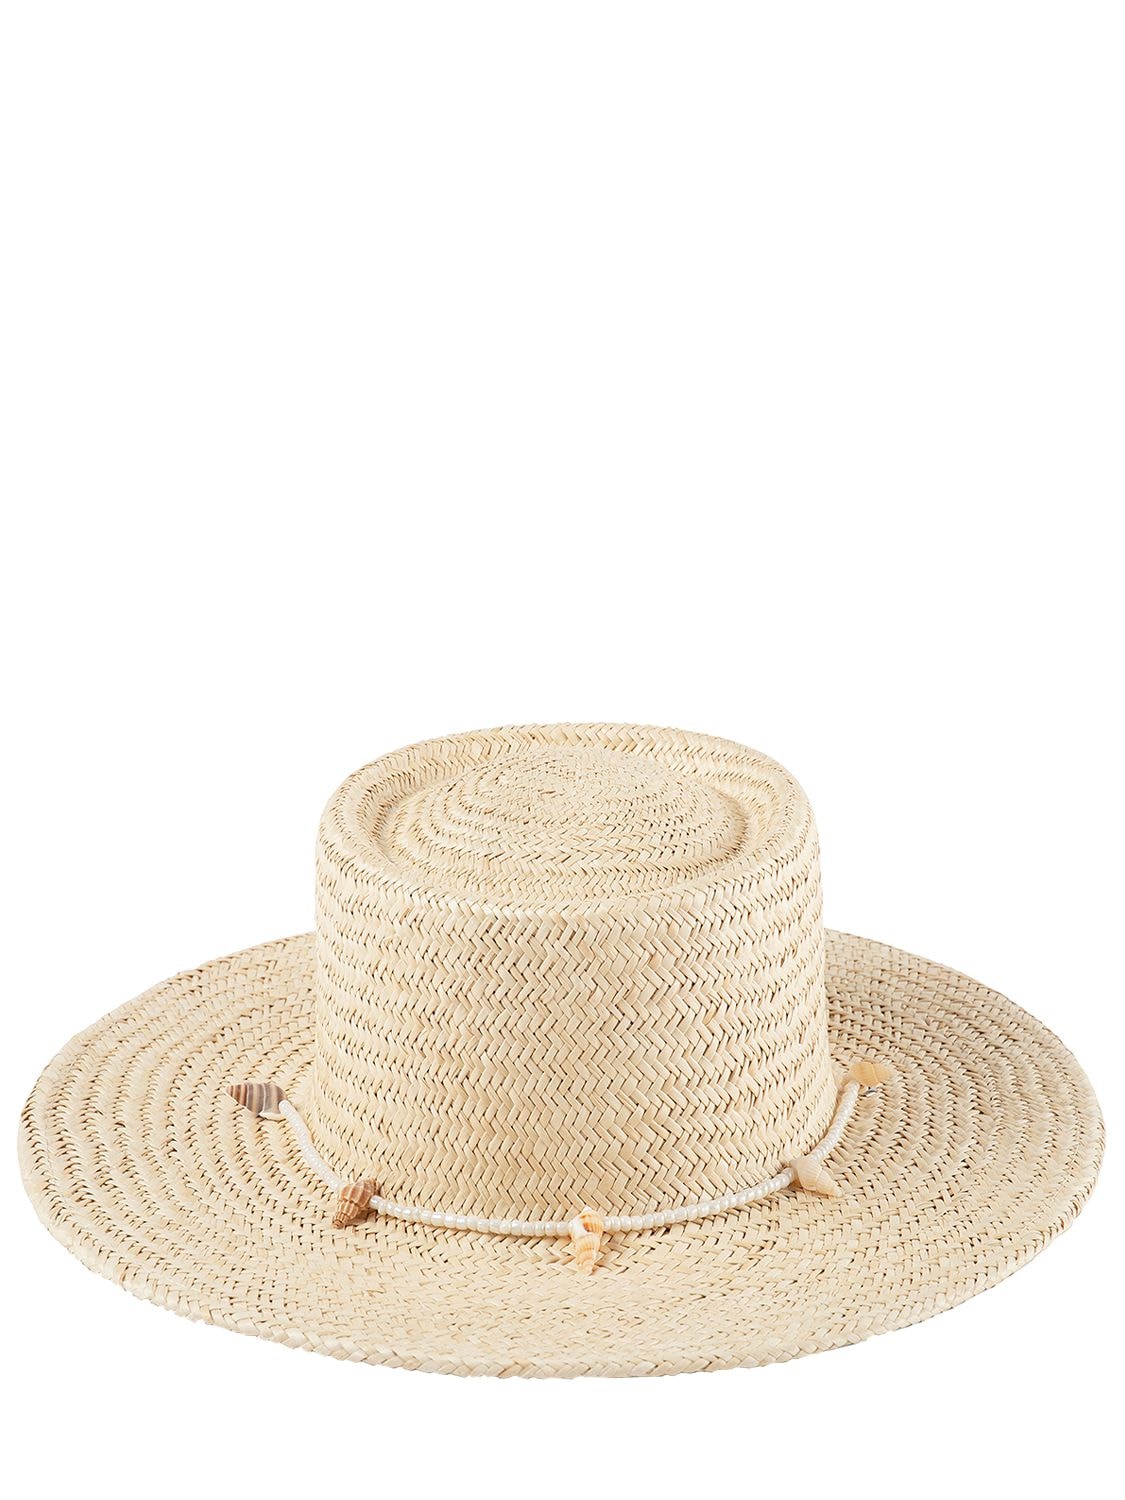 LACK OF COLOR SEASHELLS BOATER STRAW HAT